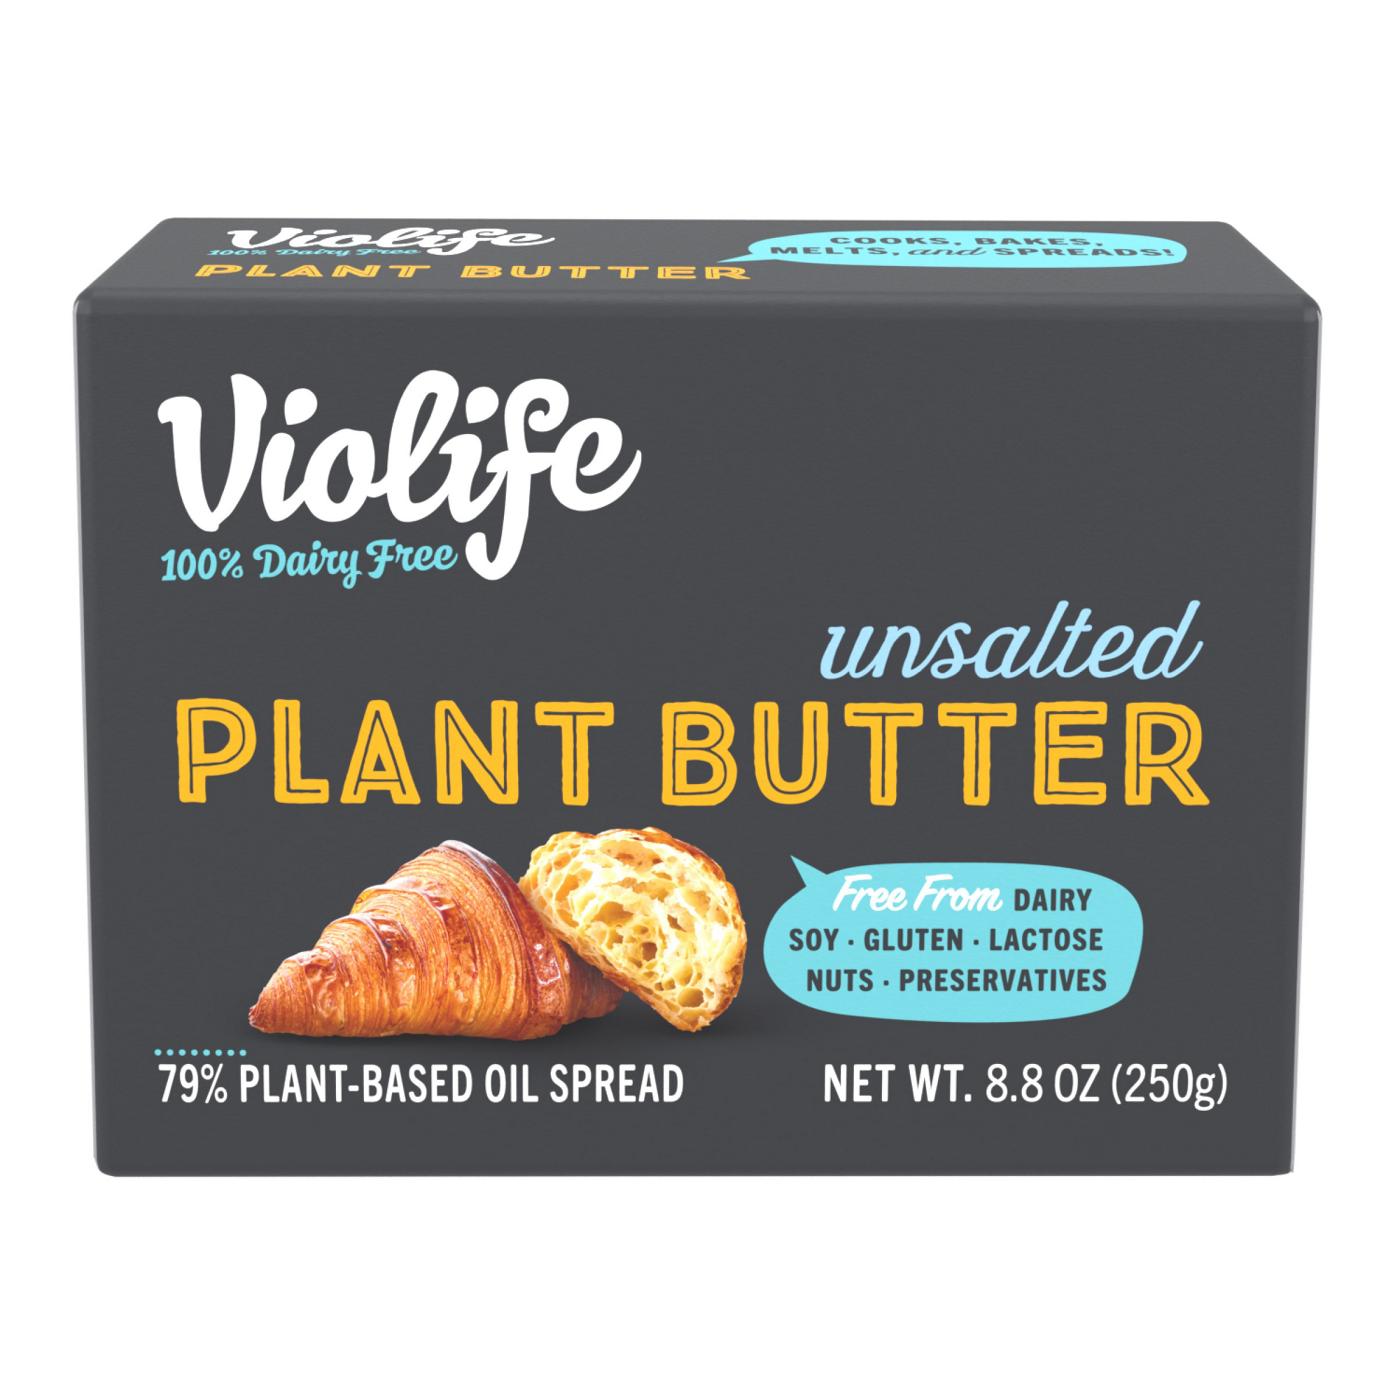 Violife Plant Butter Unsalted Dairy-Free Vegan; image 4 of 10